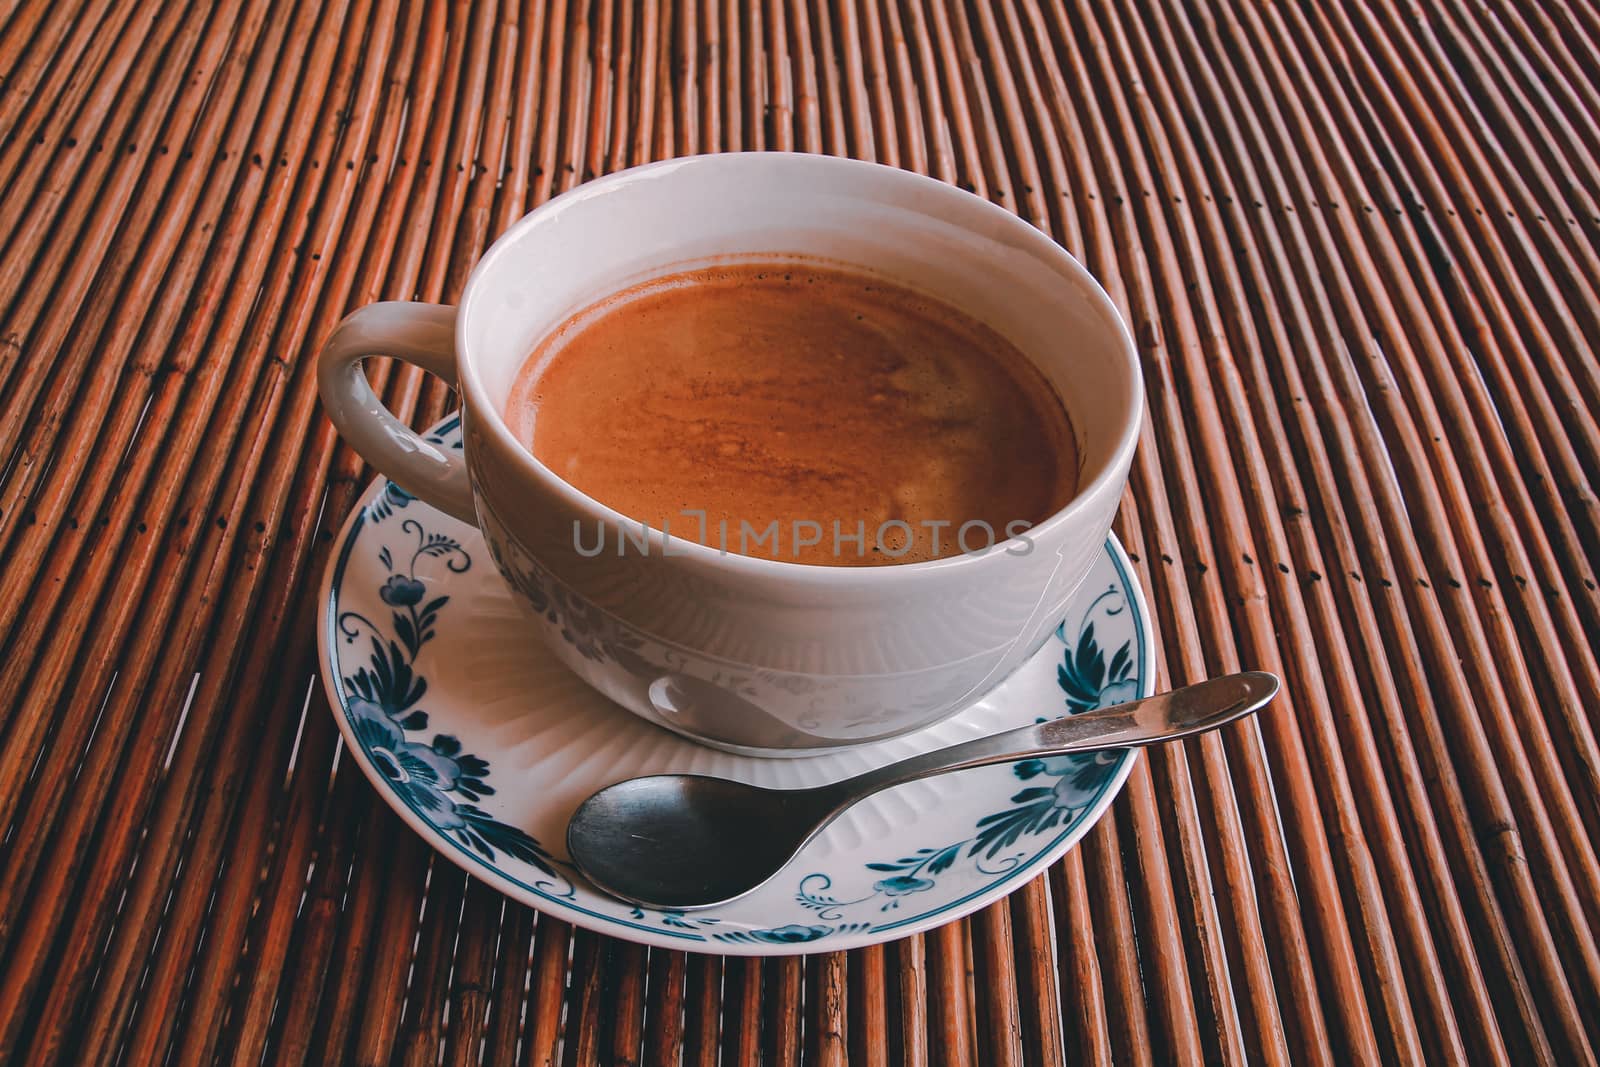 Conceptual photo of a single cup of coffee against a wooden table to show concept of self isolation and social distancing as the new normal during the covid-19 pandemic